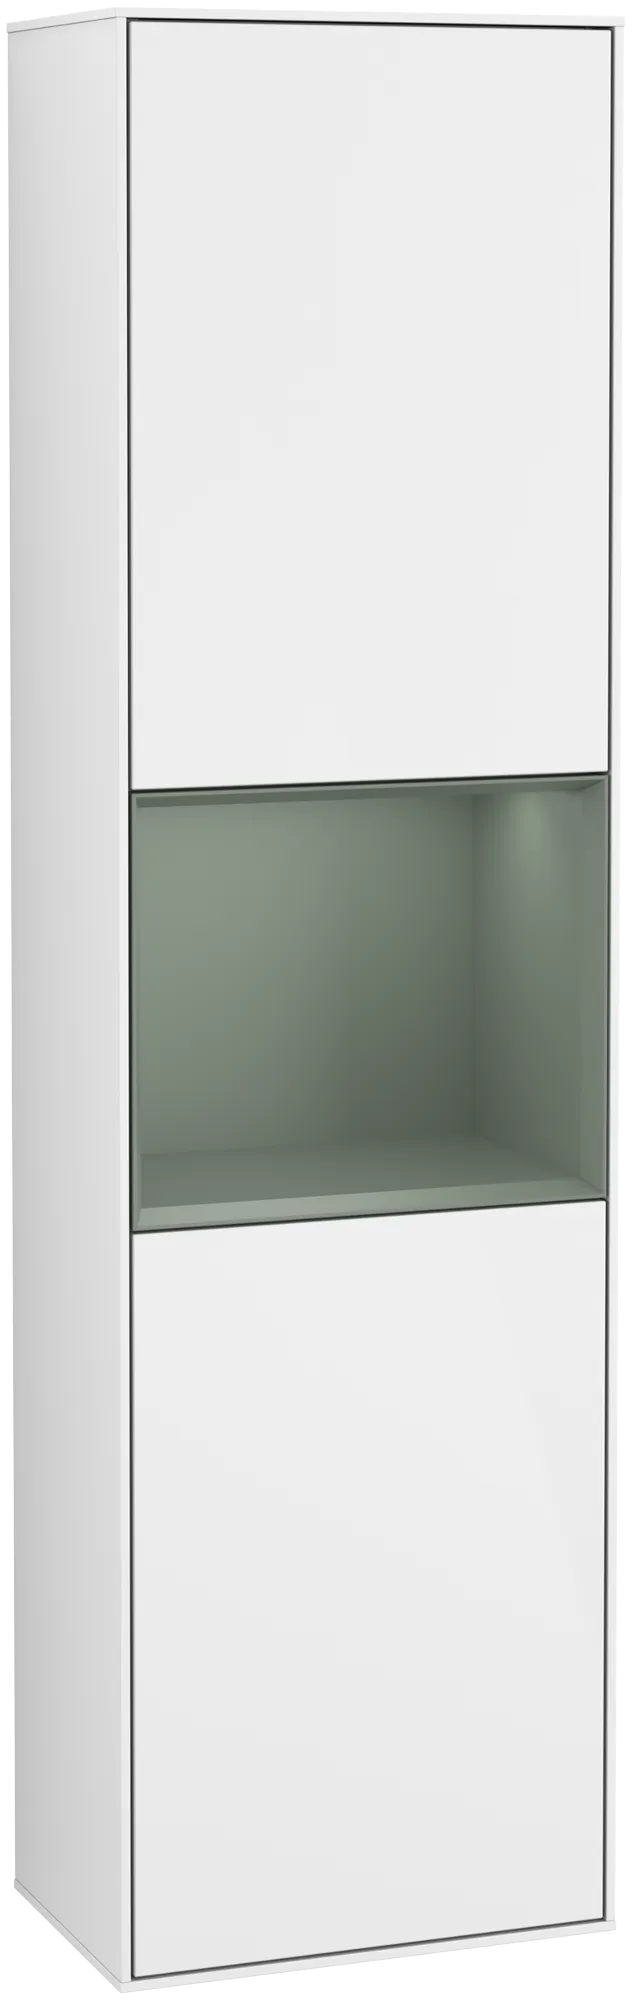 Obrázek VILLEROY BOCH Finion Tall cabinet, with lighting, 2 doors, 418 x 1516 x 270 mm, Glossy White Lacquer / Olive Matt Lacquer #G460GMGF